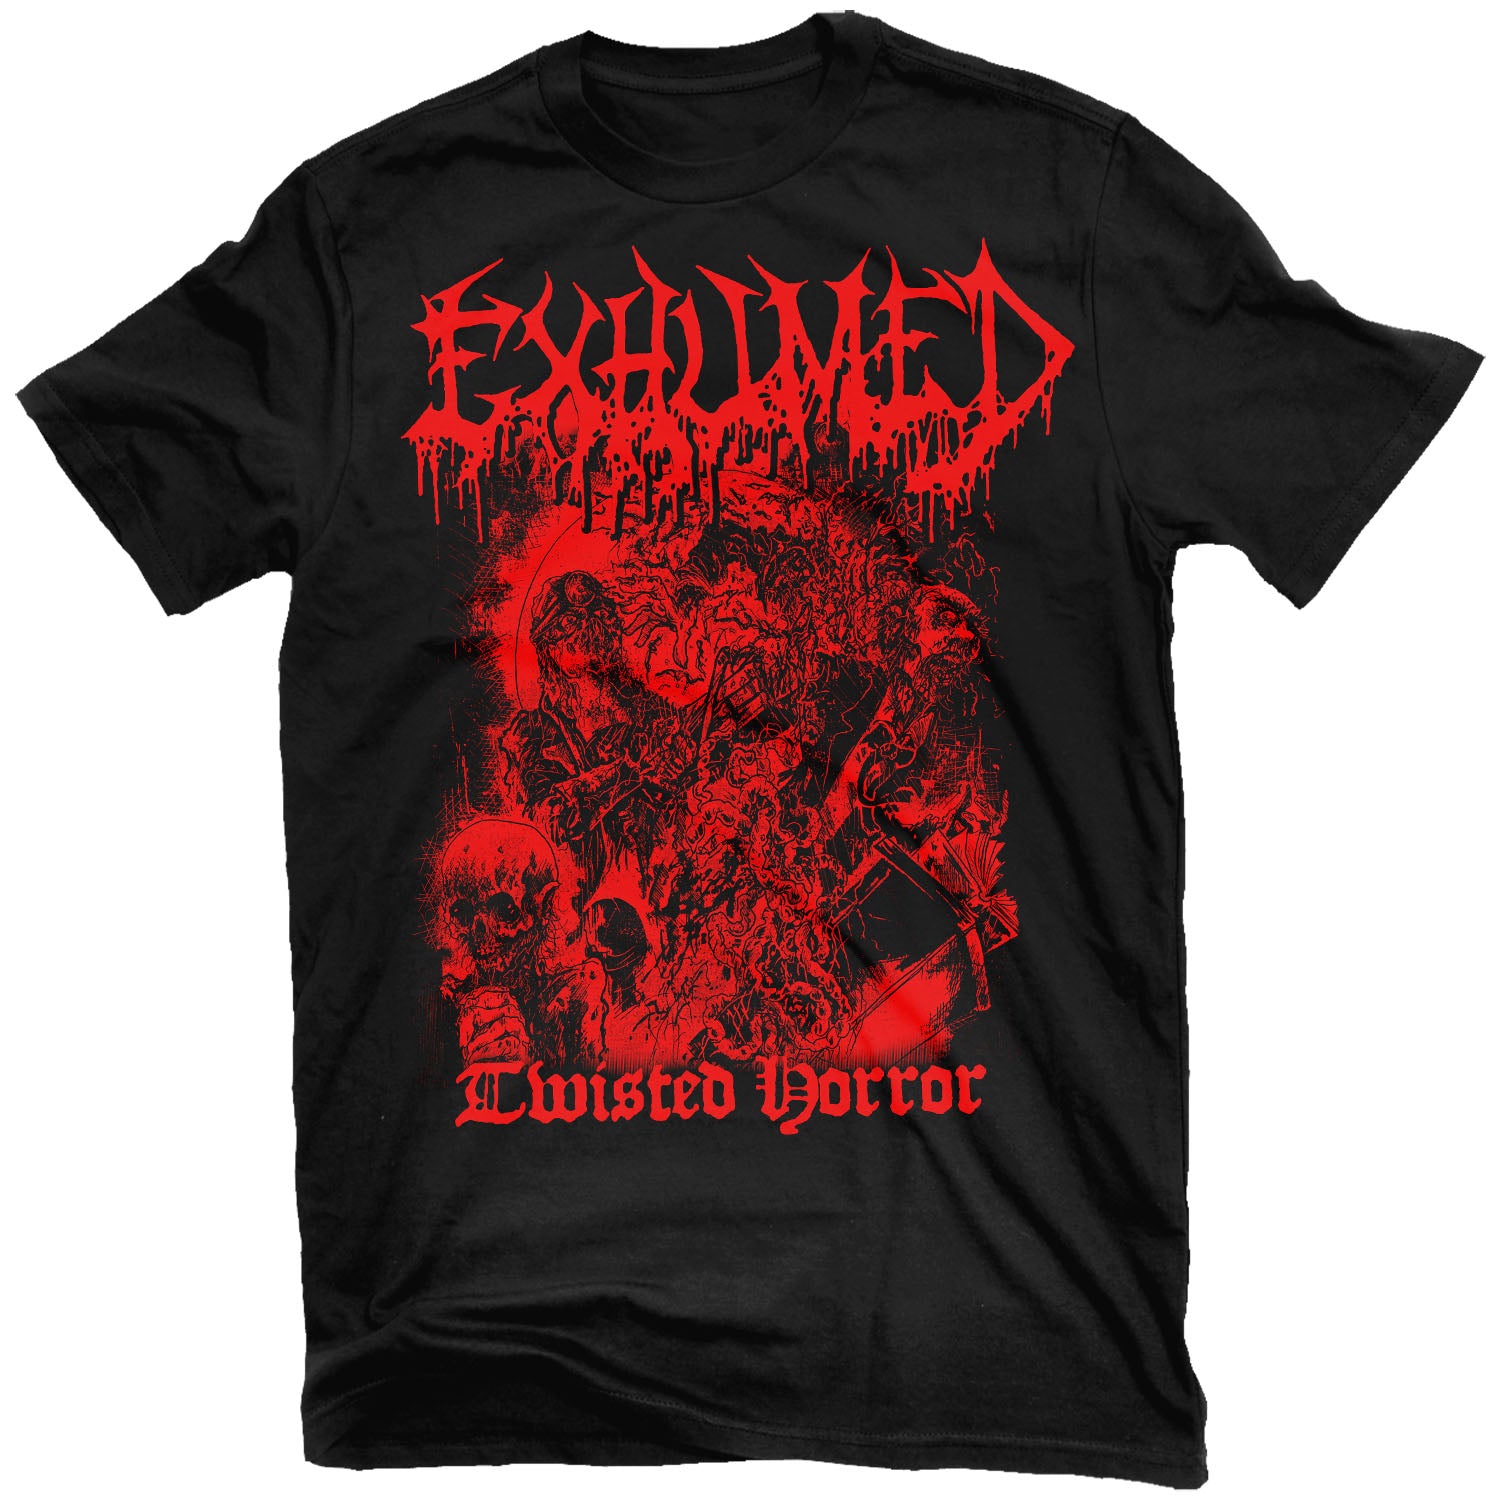 Exhumed "Twisted Horror" T-Shirt